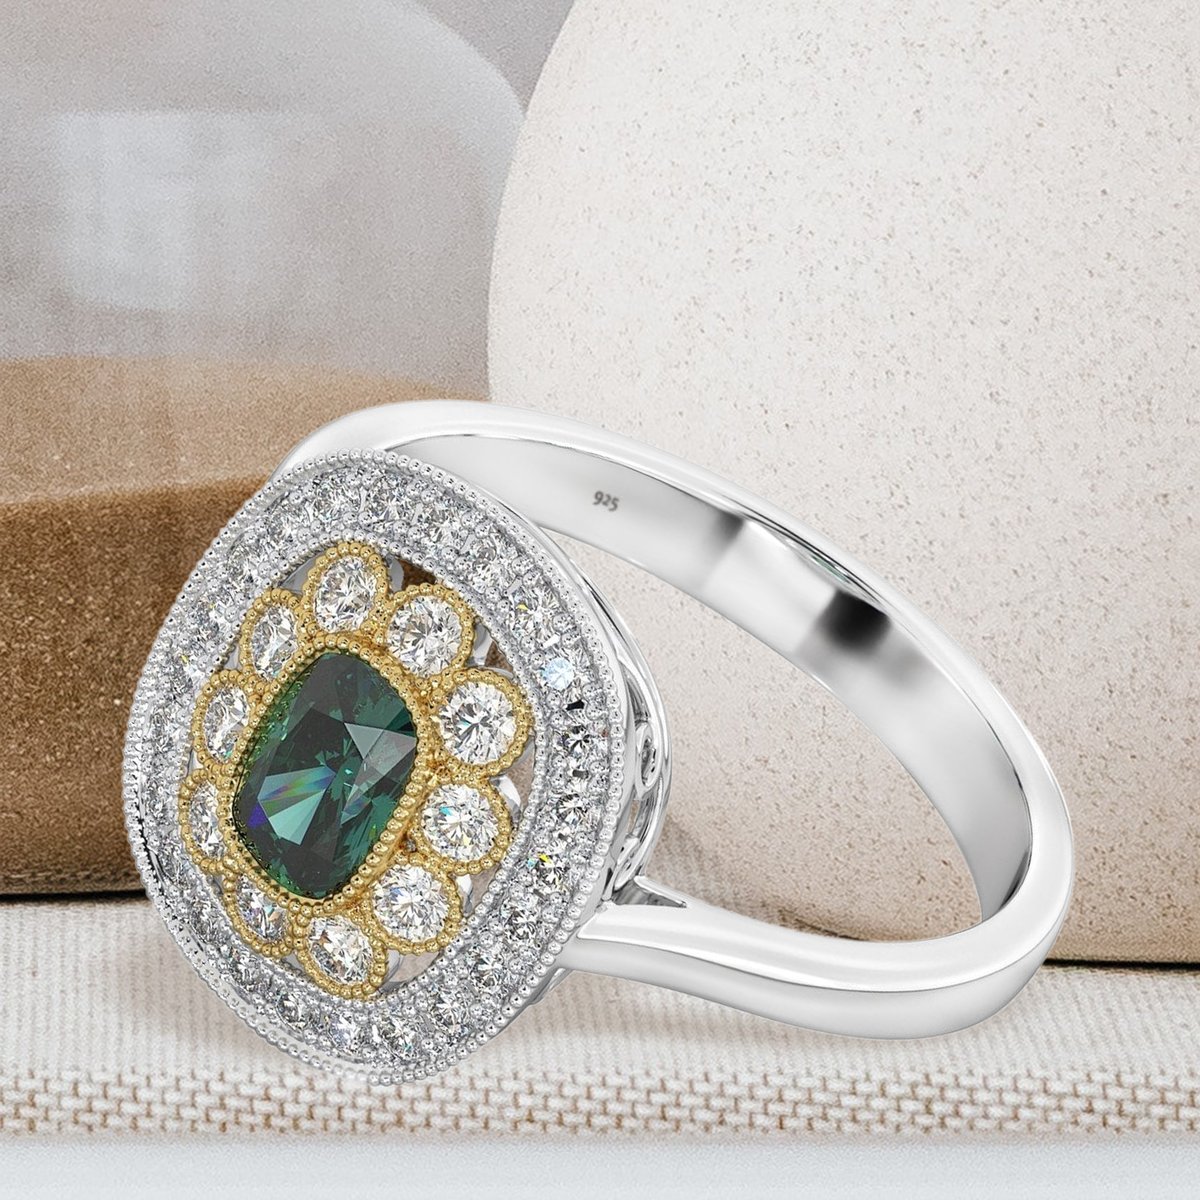 Just perfect for a colourful Spring 💎🌼🌷 Sterling Silver Two Tone Halo Ring with Green Emerald Cubic Zirconia - Code 674 Buy here - tinyurl.com/muetsp6a #jewelryfashion #jewerly #jewels #trendyjewelry #jewelrylovers #jewelrylover #jewel #jewelrydesigner #beautiful